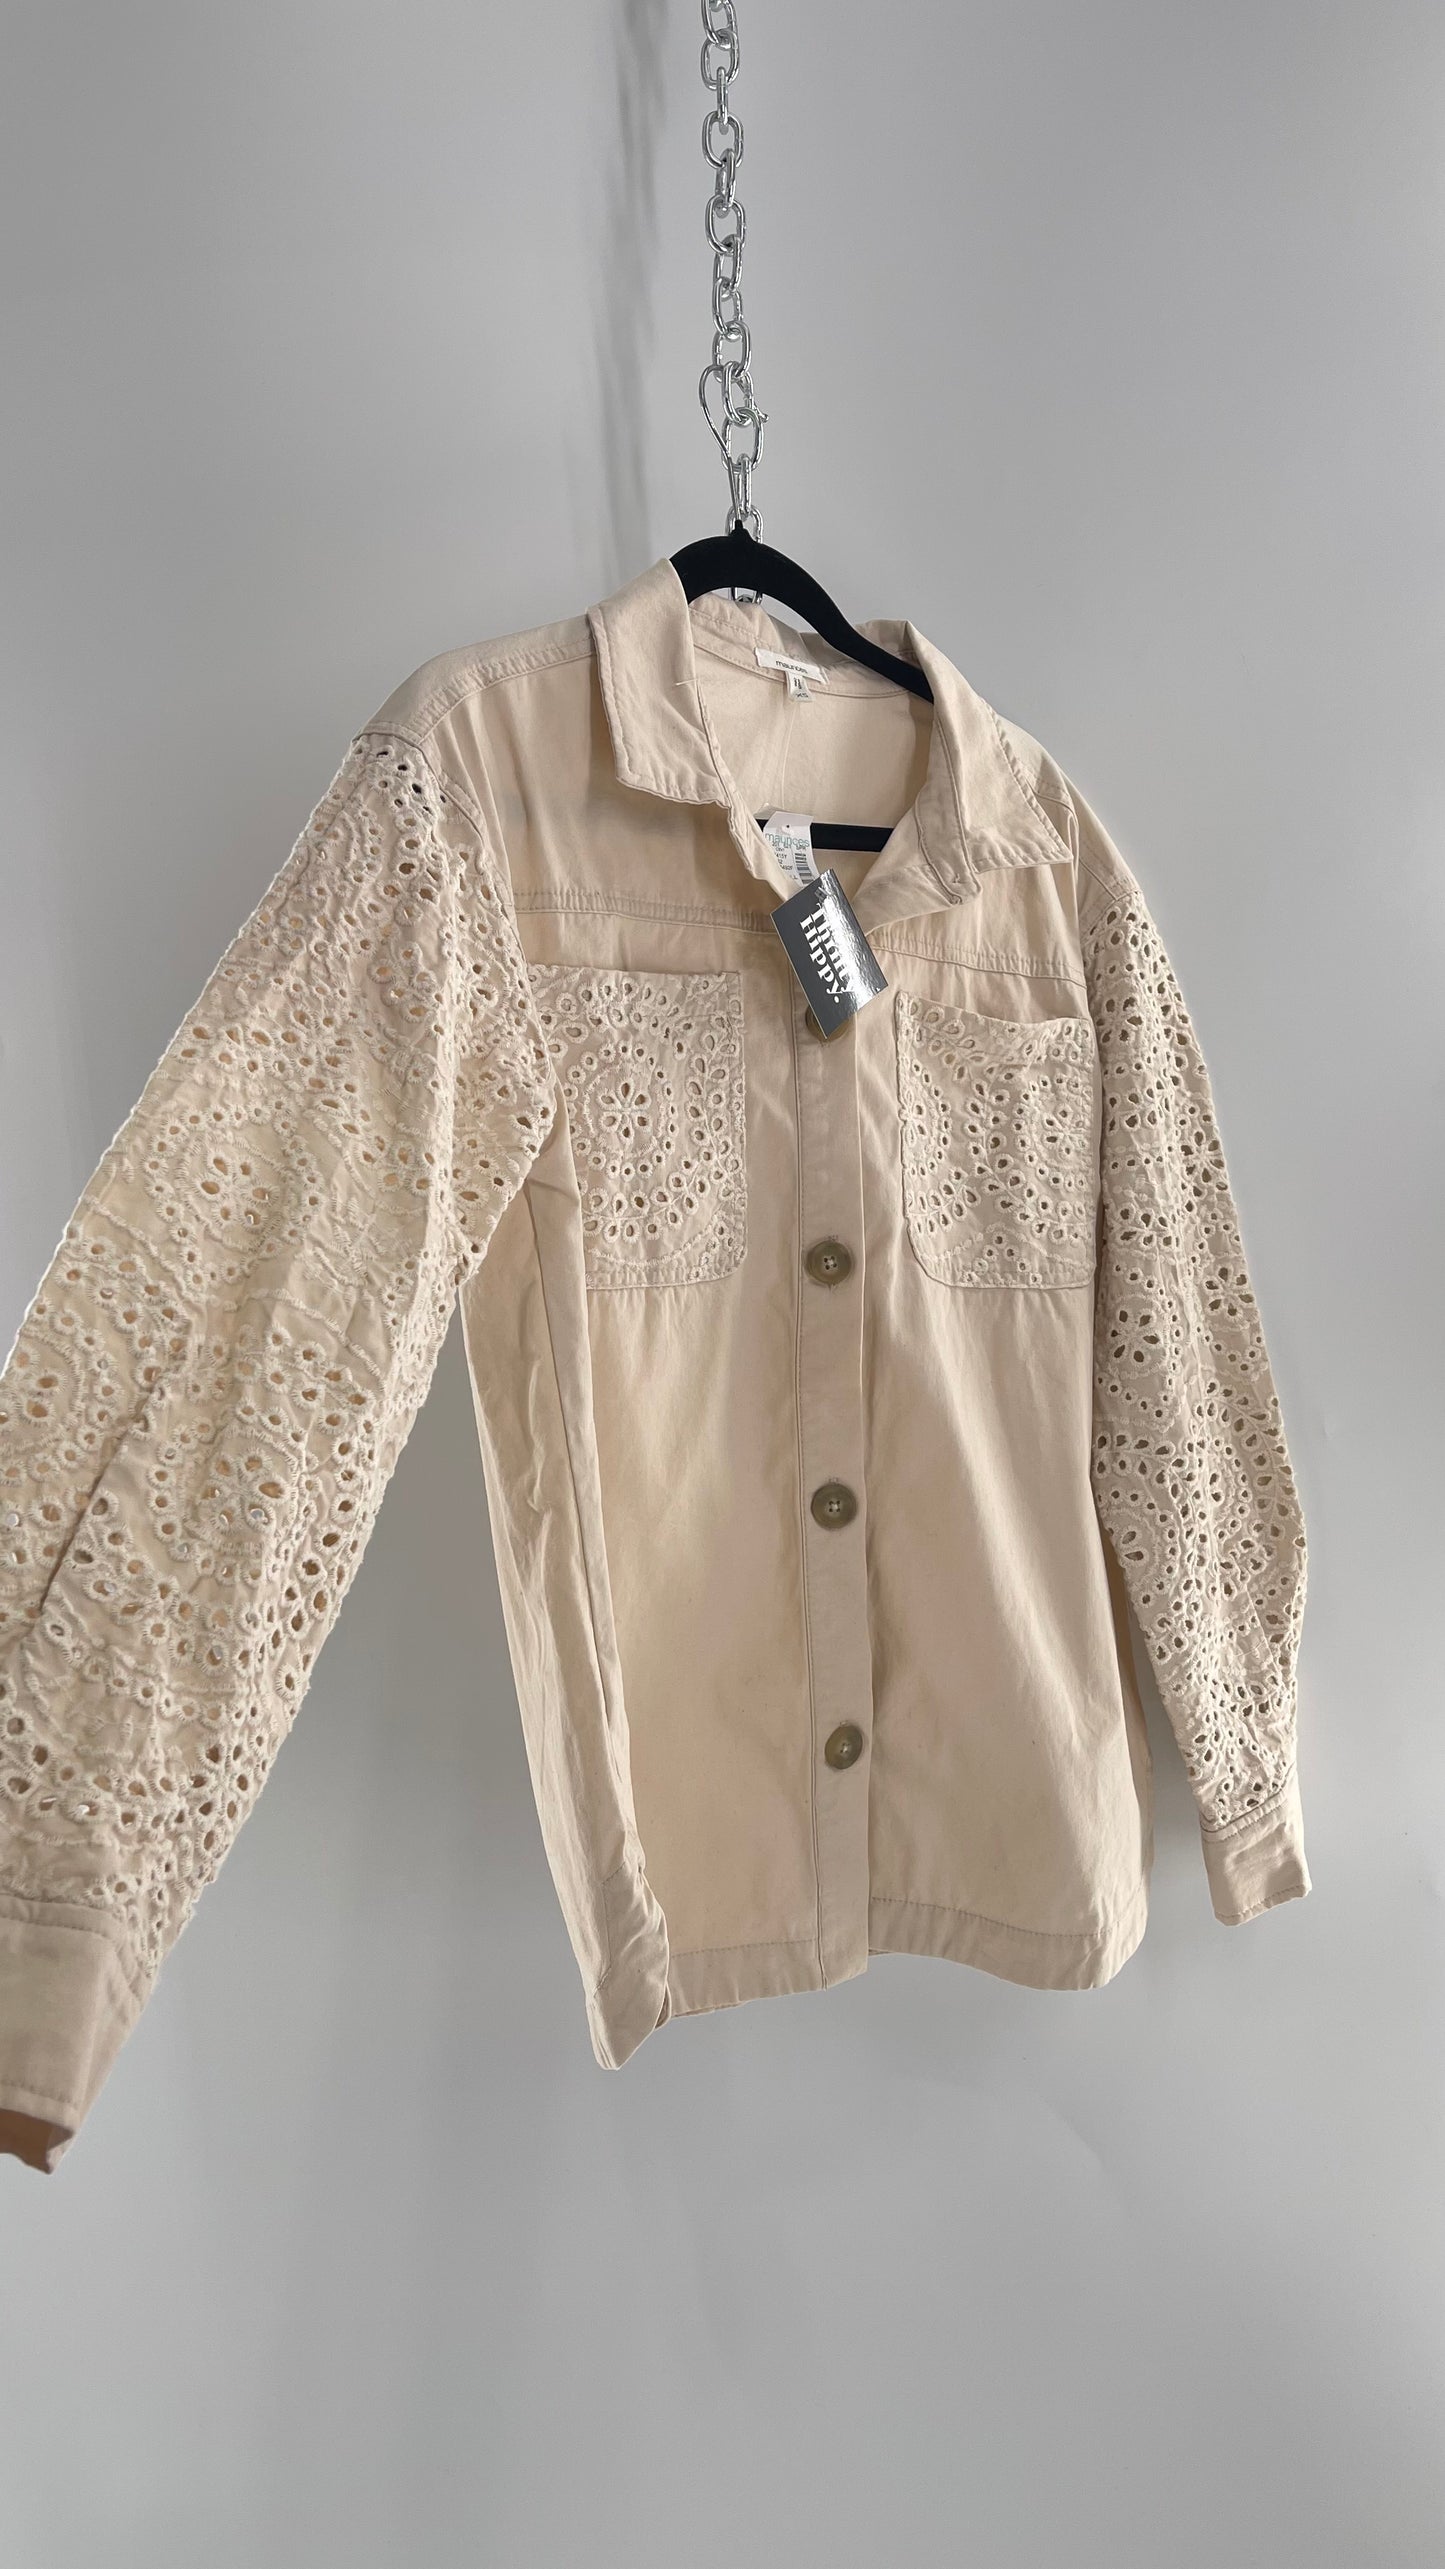 Maurices Anthropologie Beige Cotton Button Up with Eyelet Lace Sleeves and Pockets with Tags Attached  (XS)